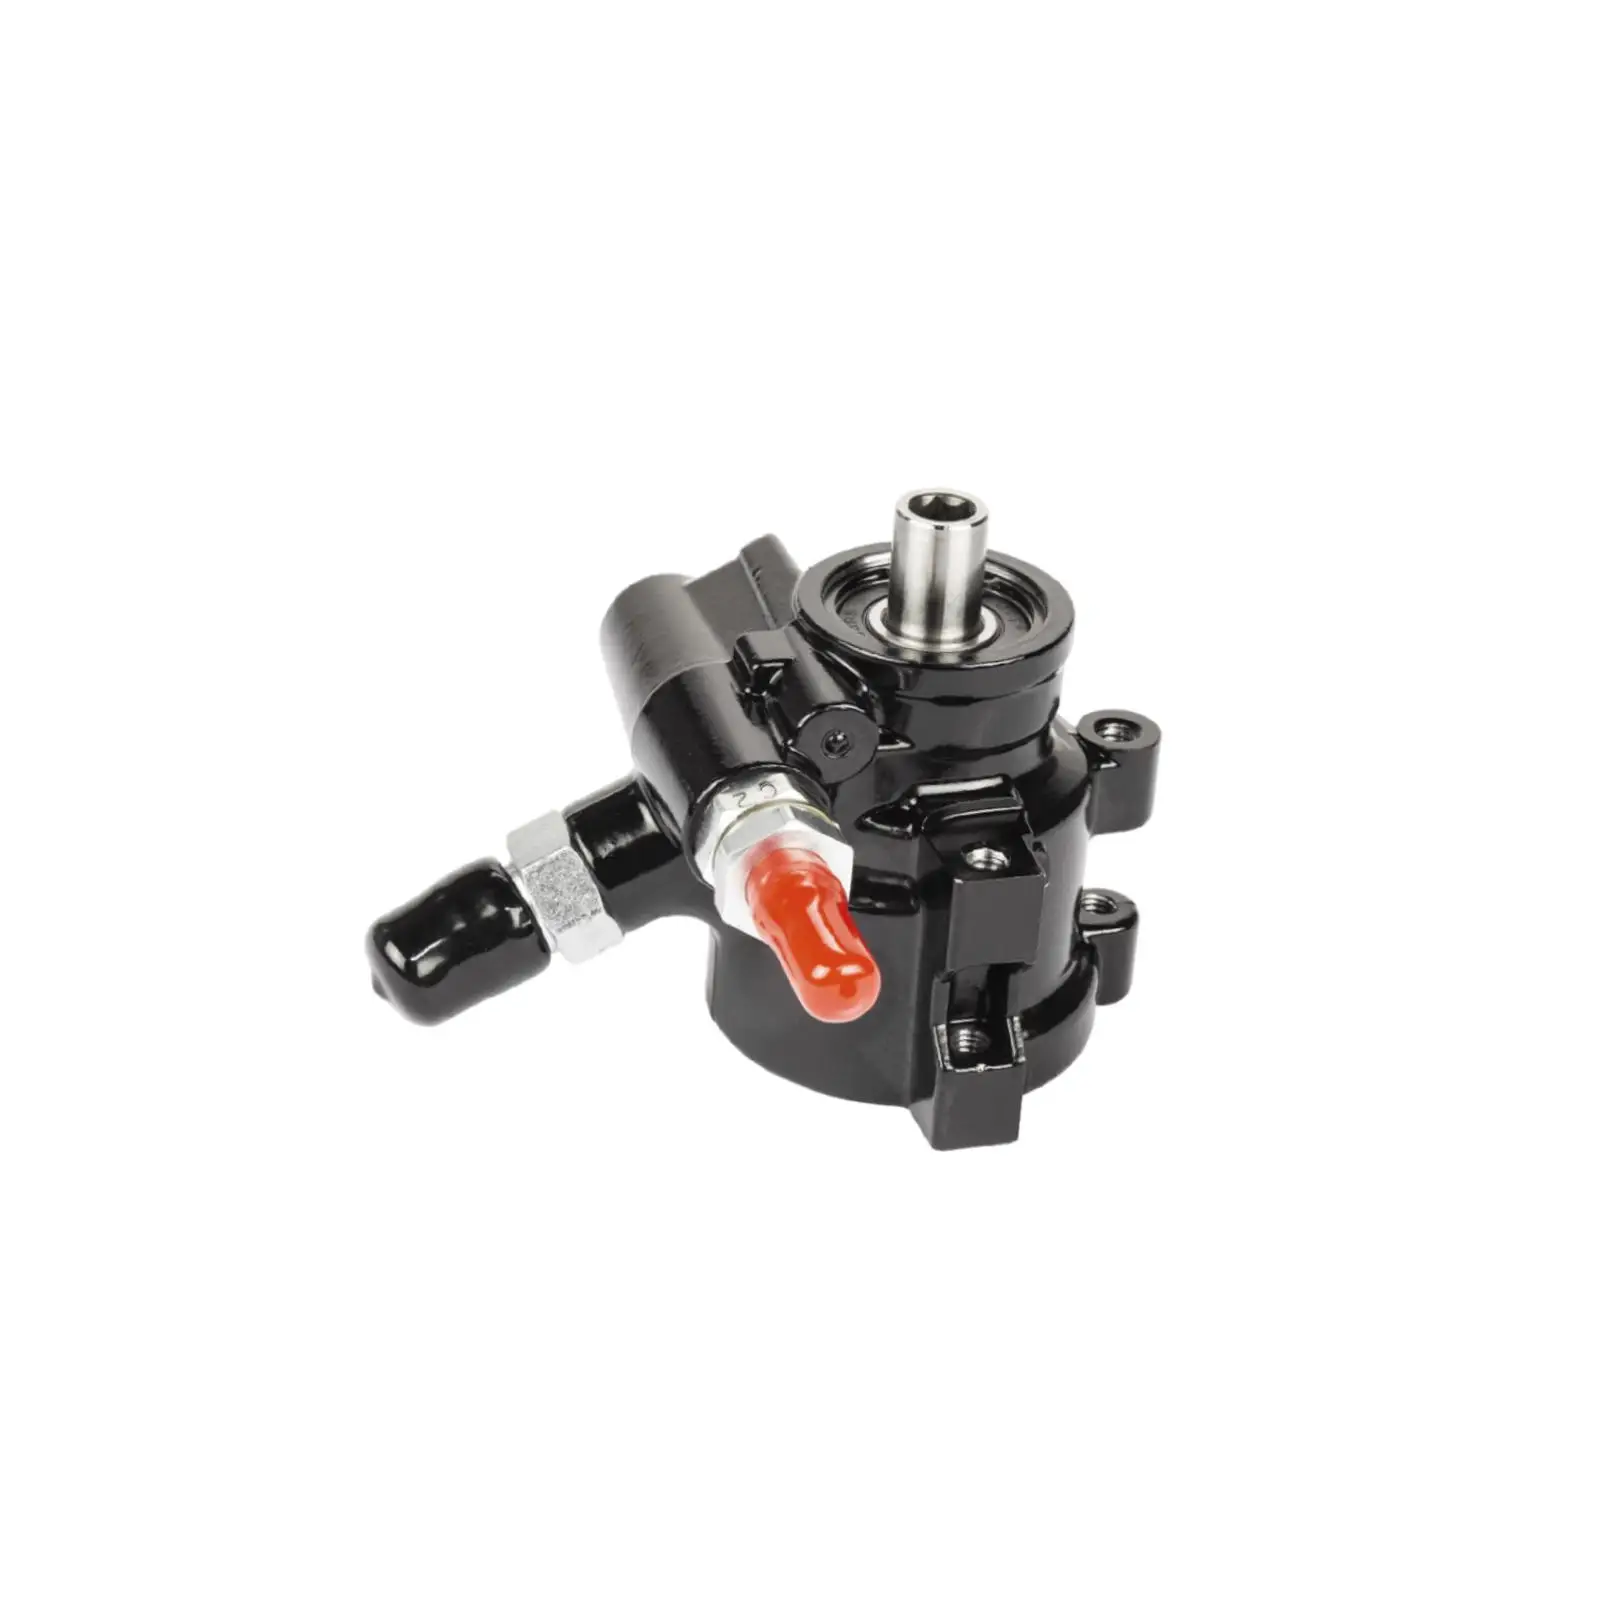 Power Steering Pump Replacement Car Accessories for Saginaw TC Type 2 Premium Easy to Install High Performance